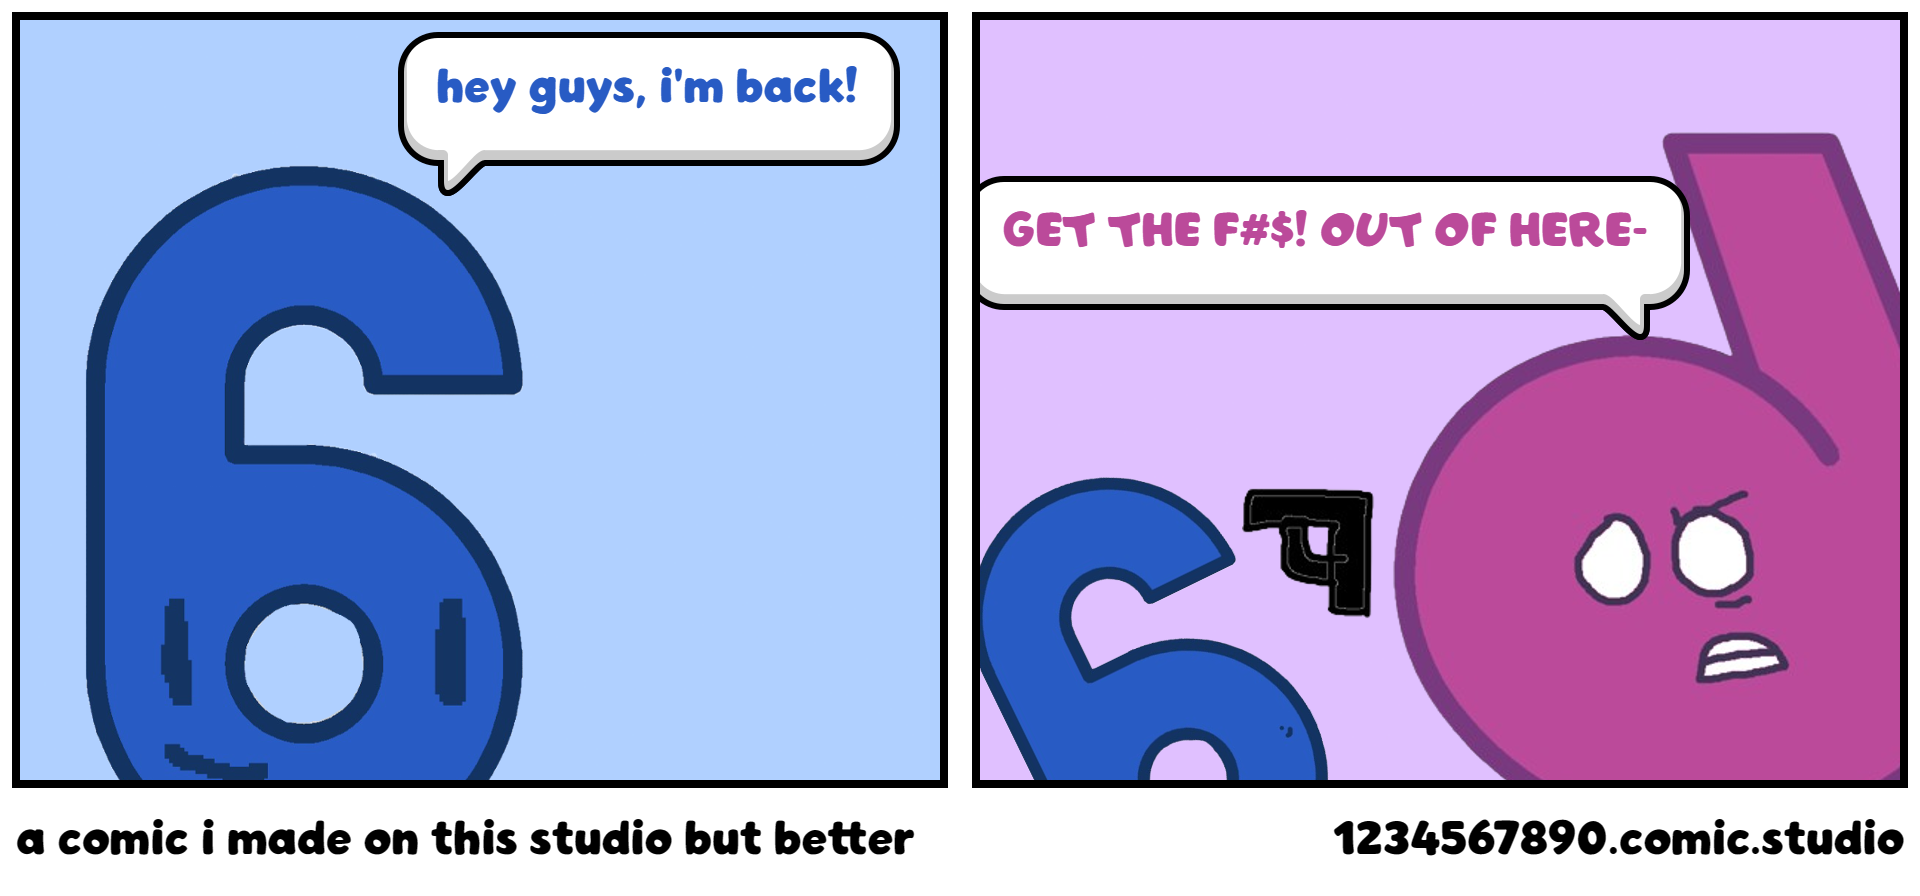 a comic i made on this studio but better